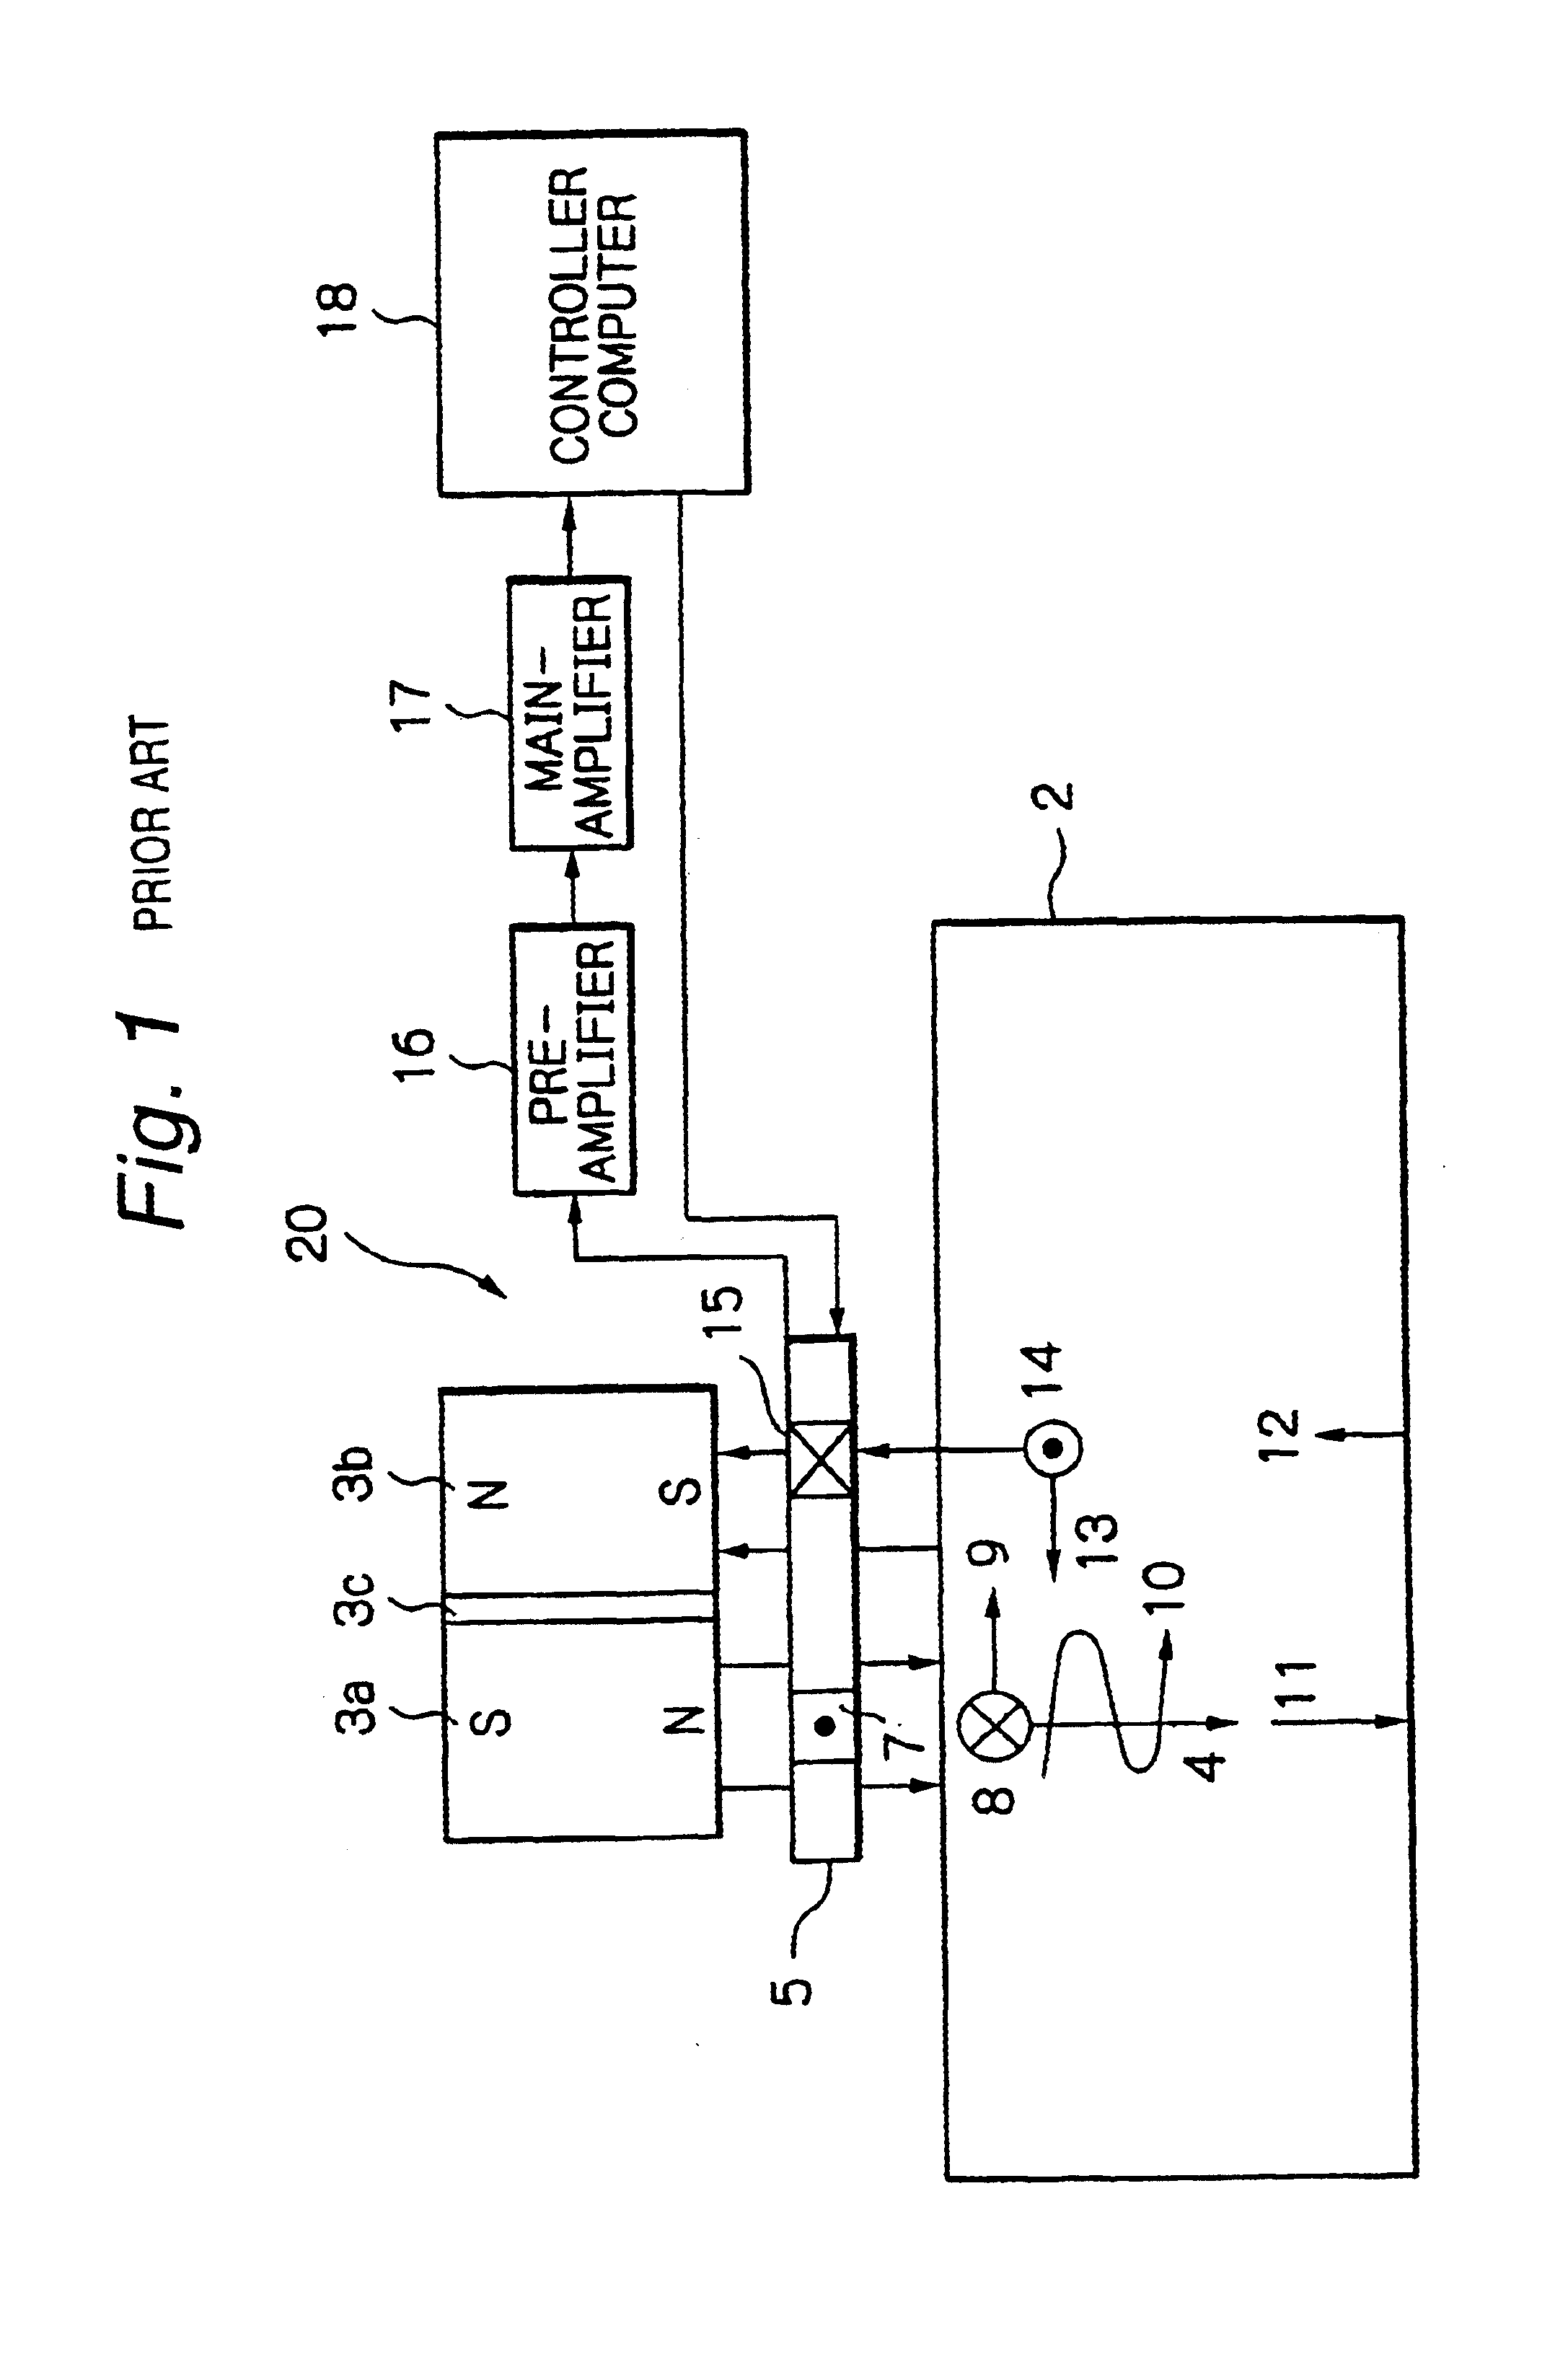 Method and apparatus for diagnosing damages of conductive materials